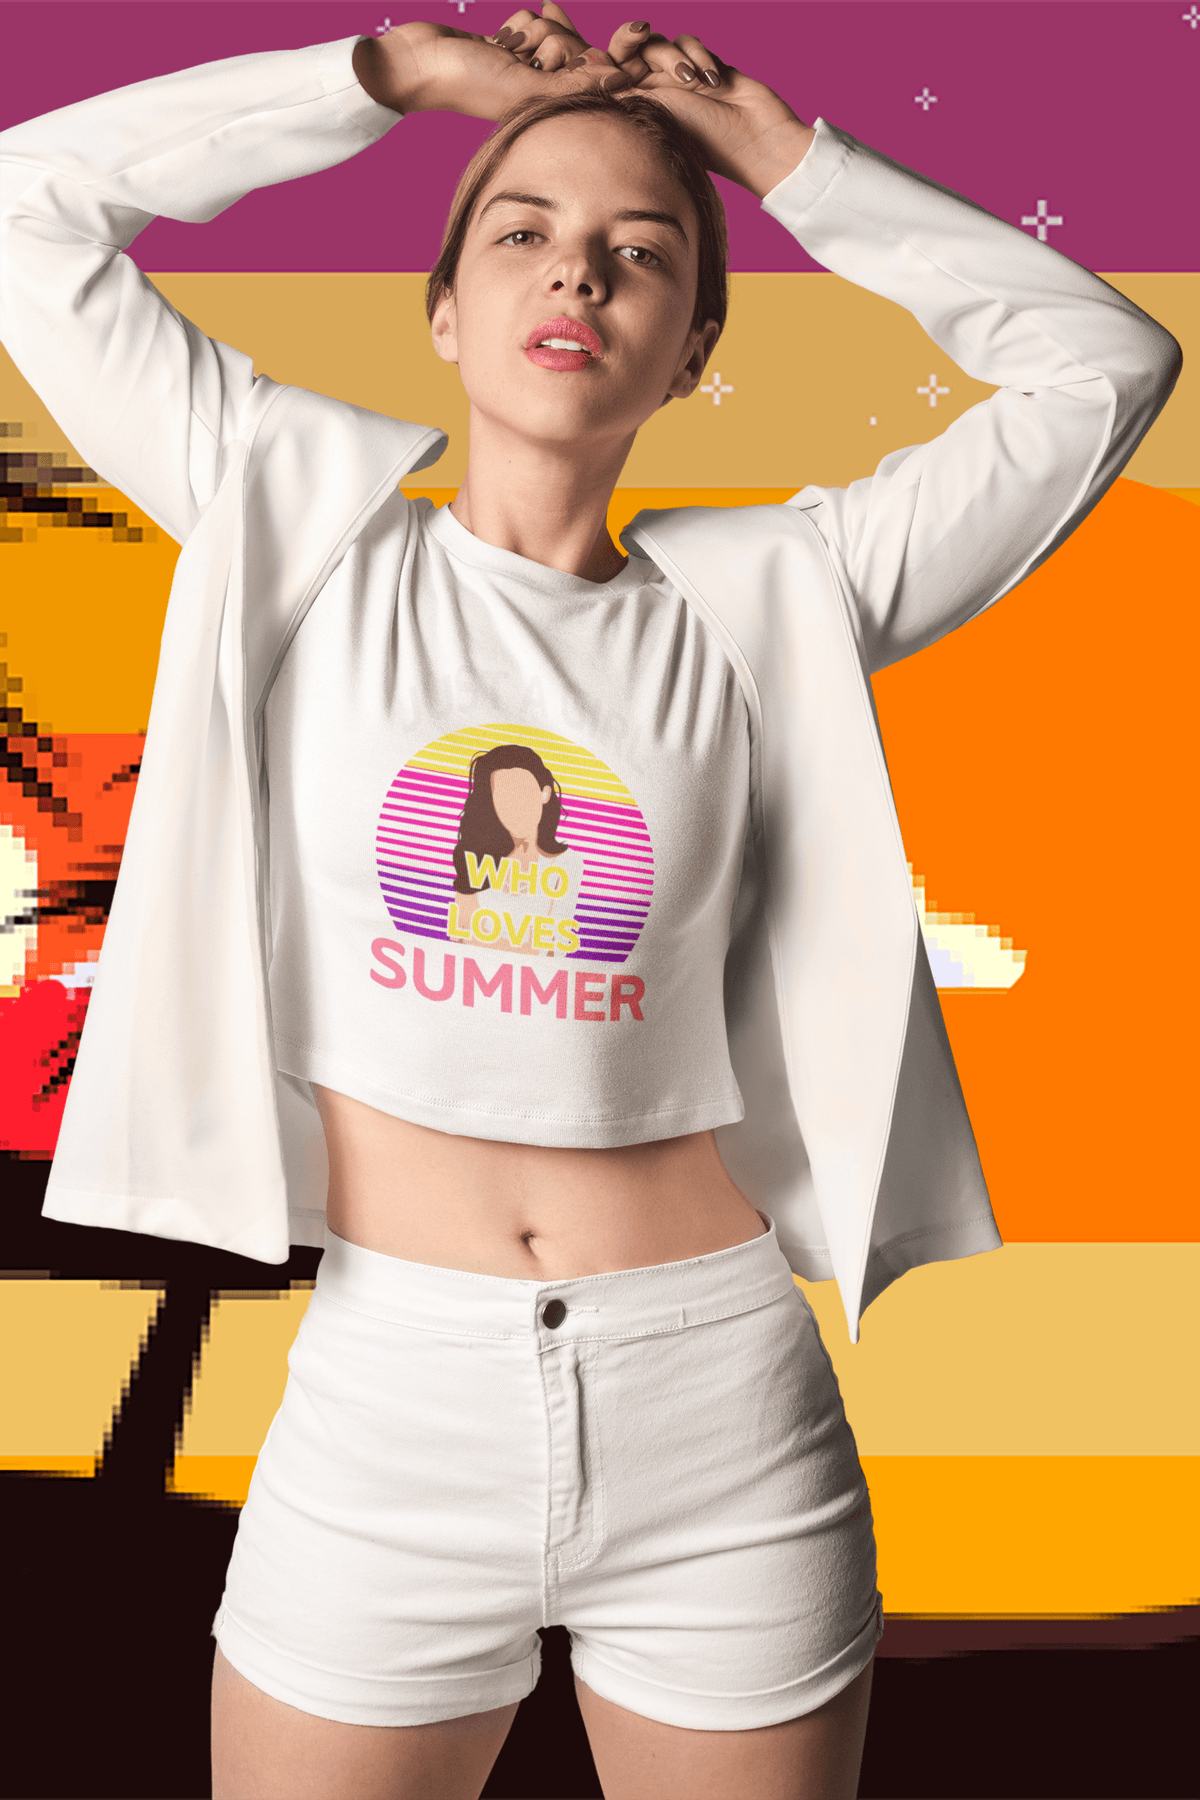 Girl Who Loves Summer - Cropped T-Shirt-Cropped Tees-StylinArts